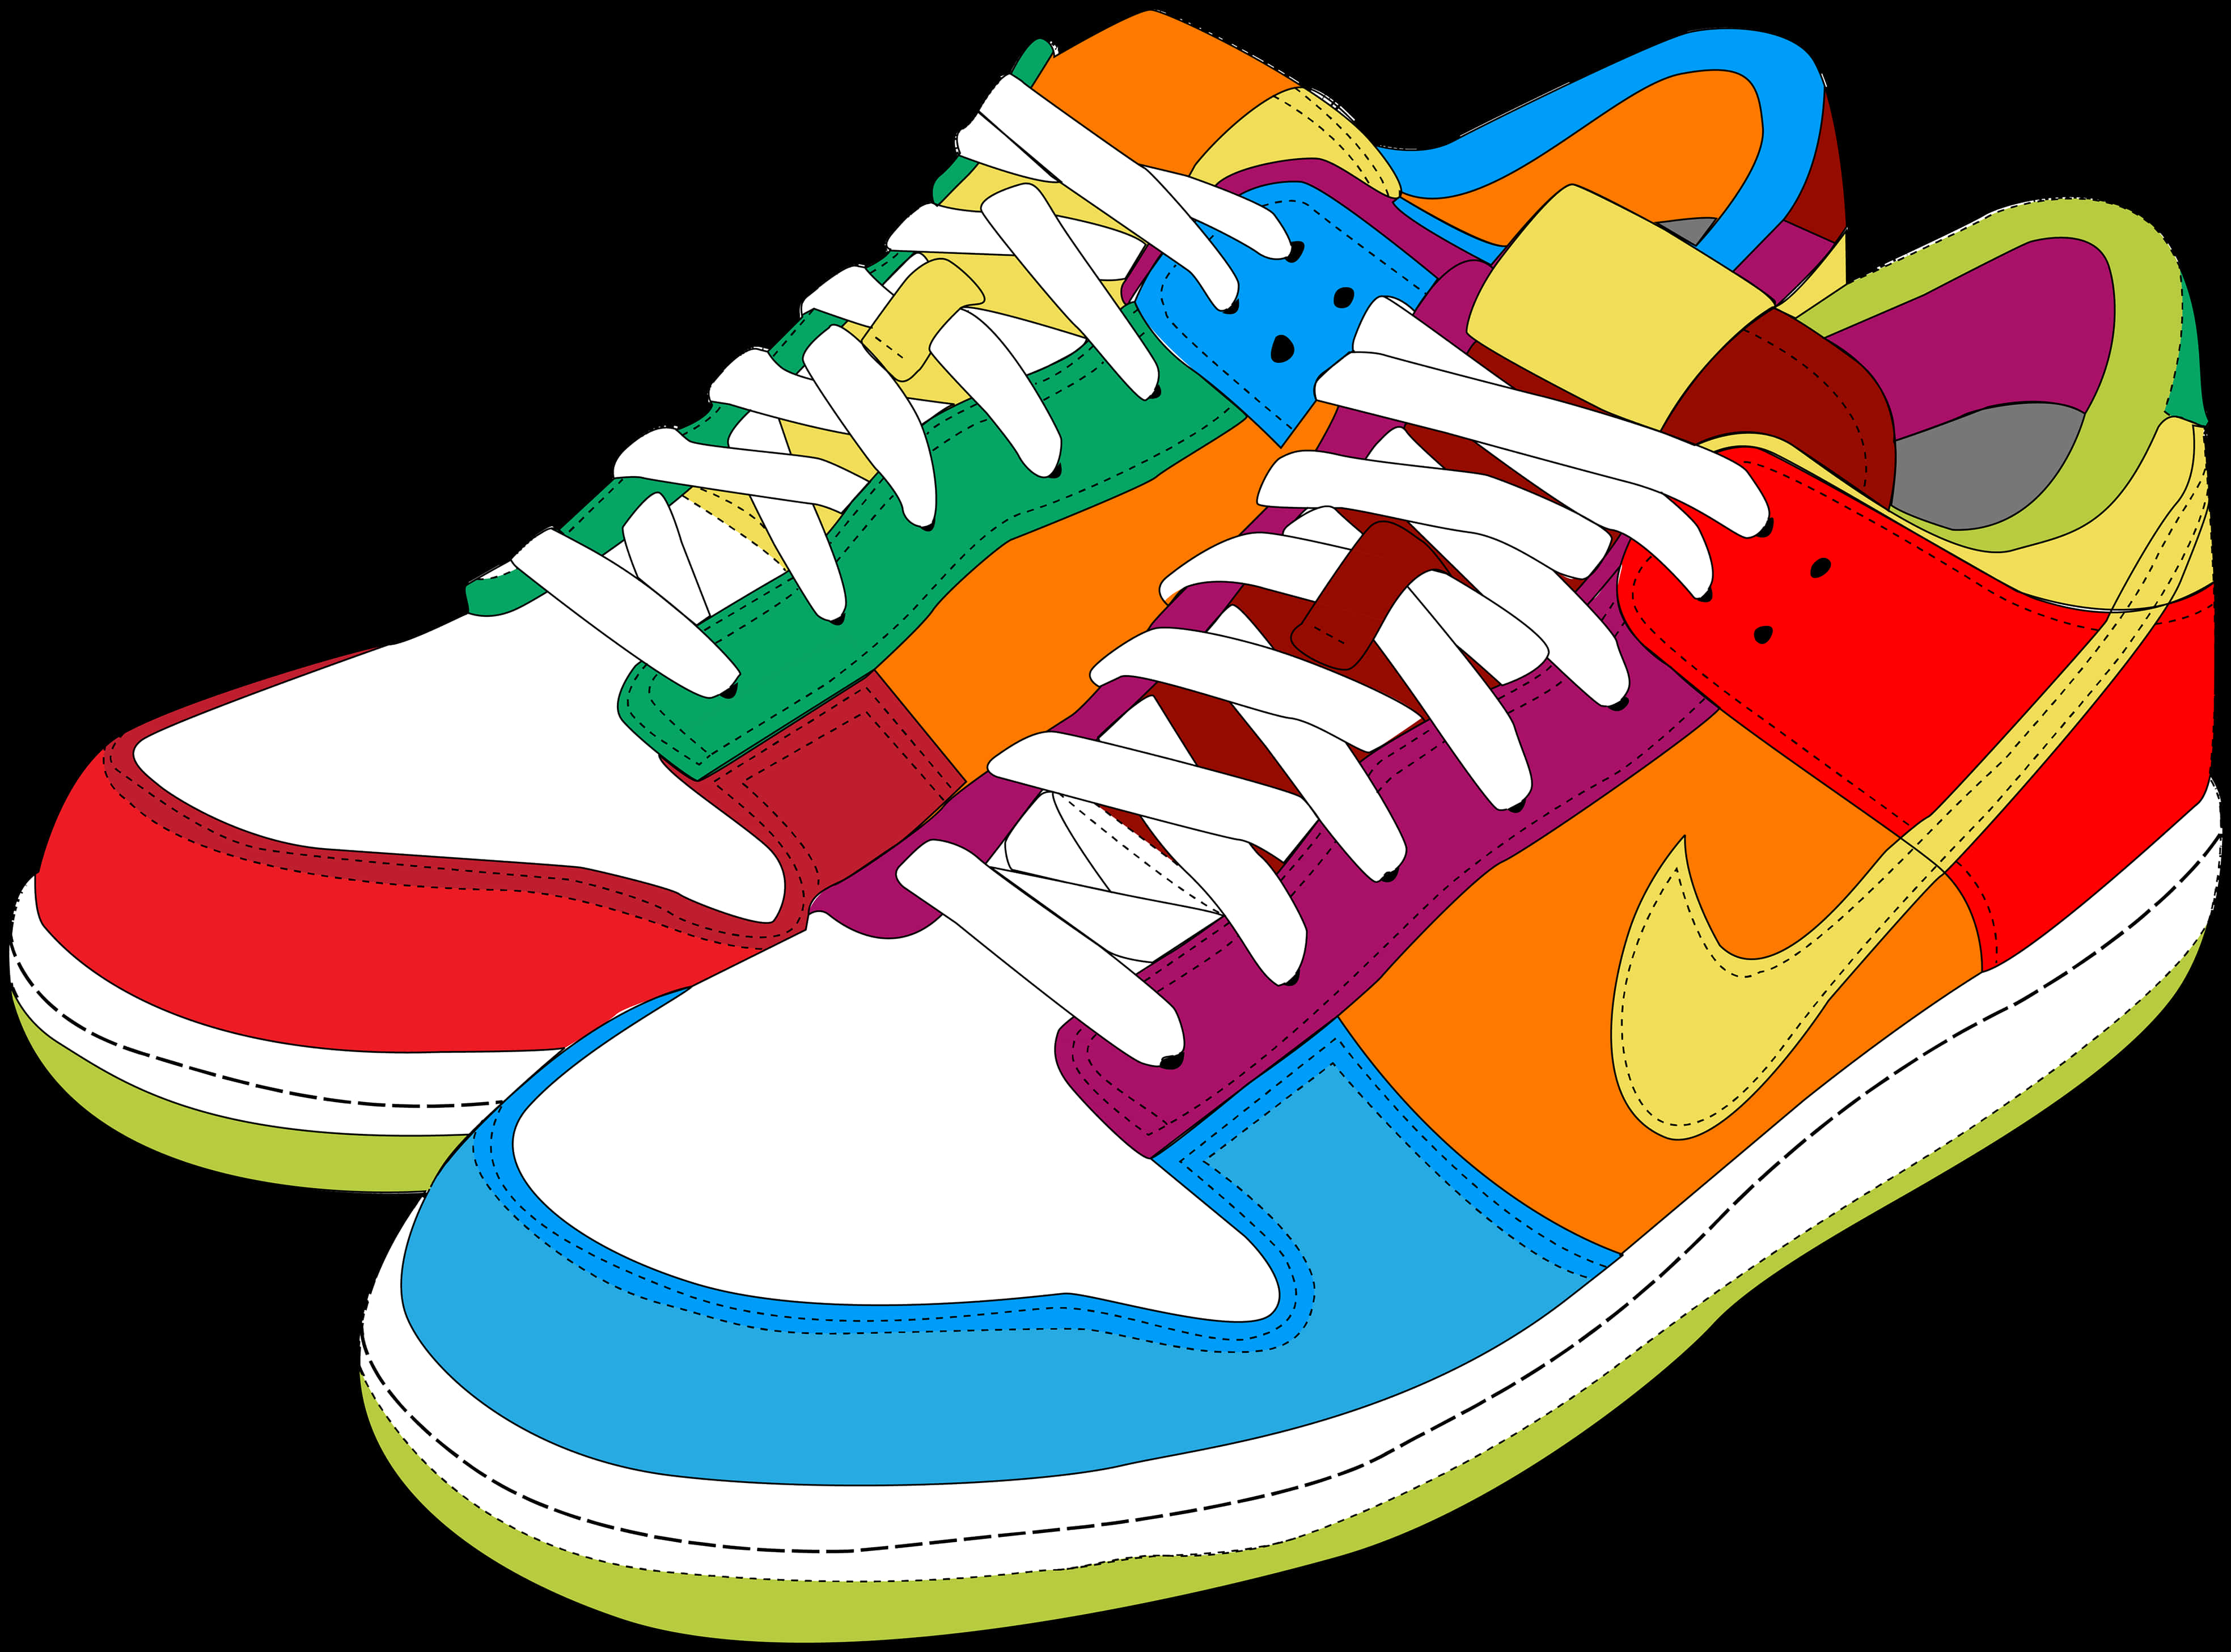 Colorful Sneakers Illustration